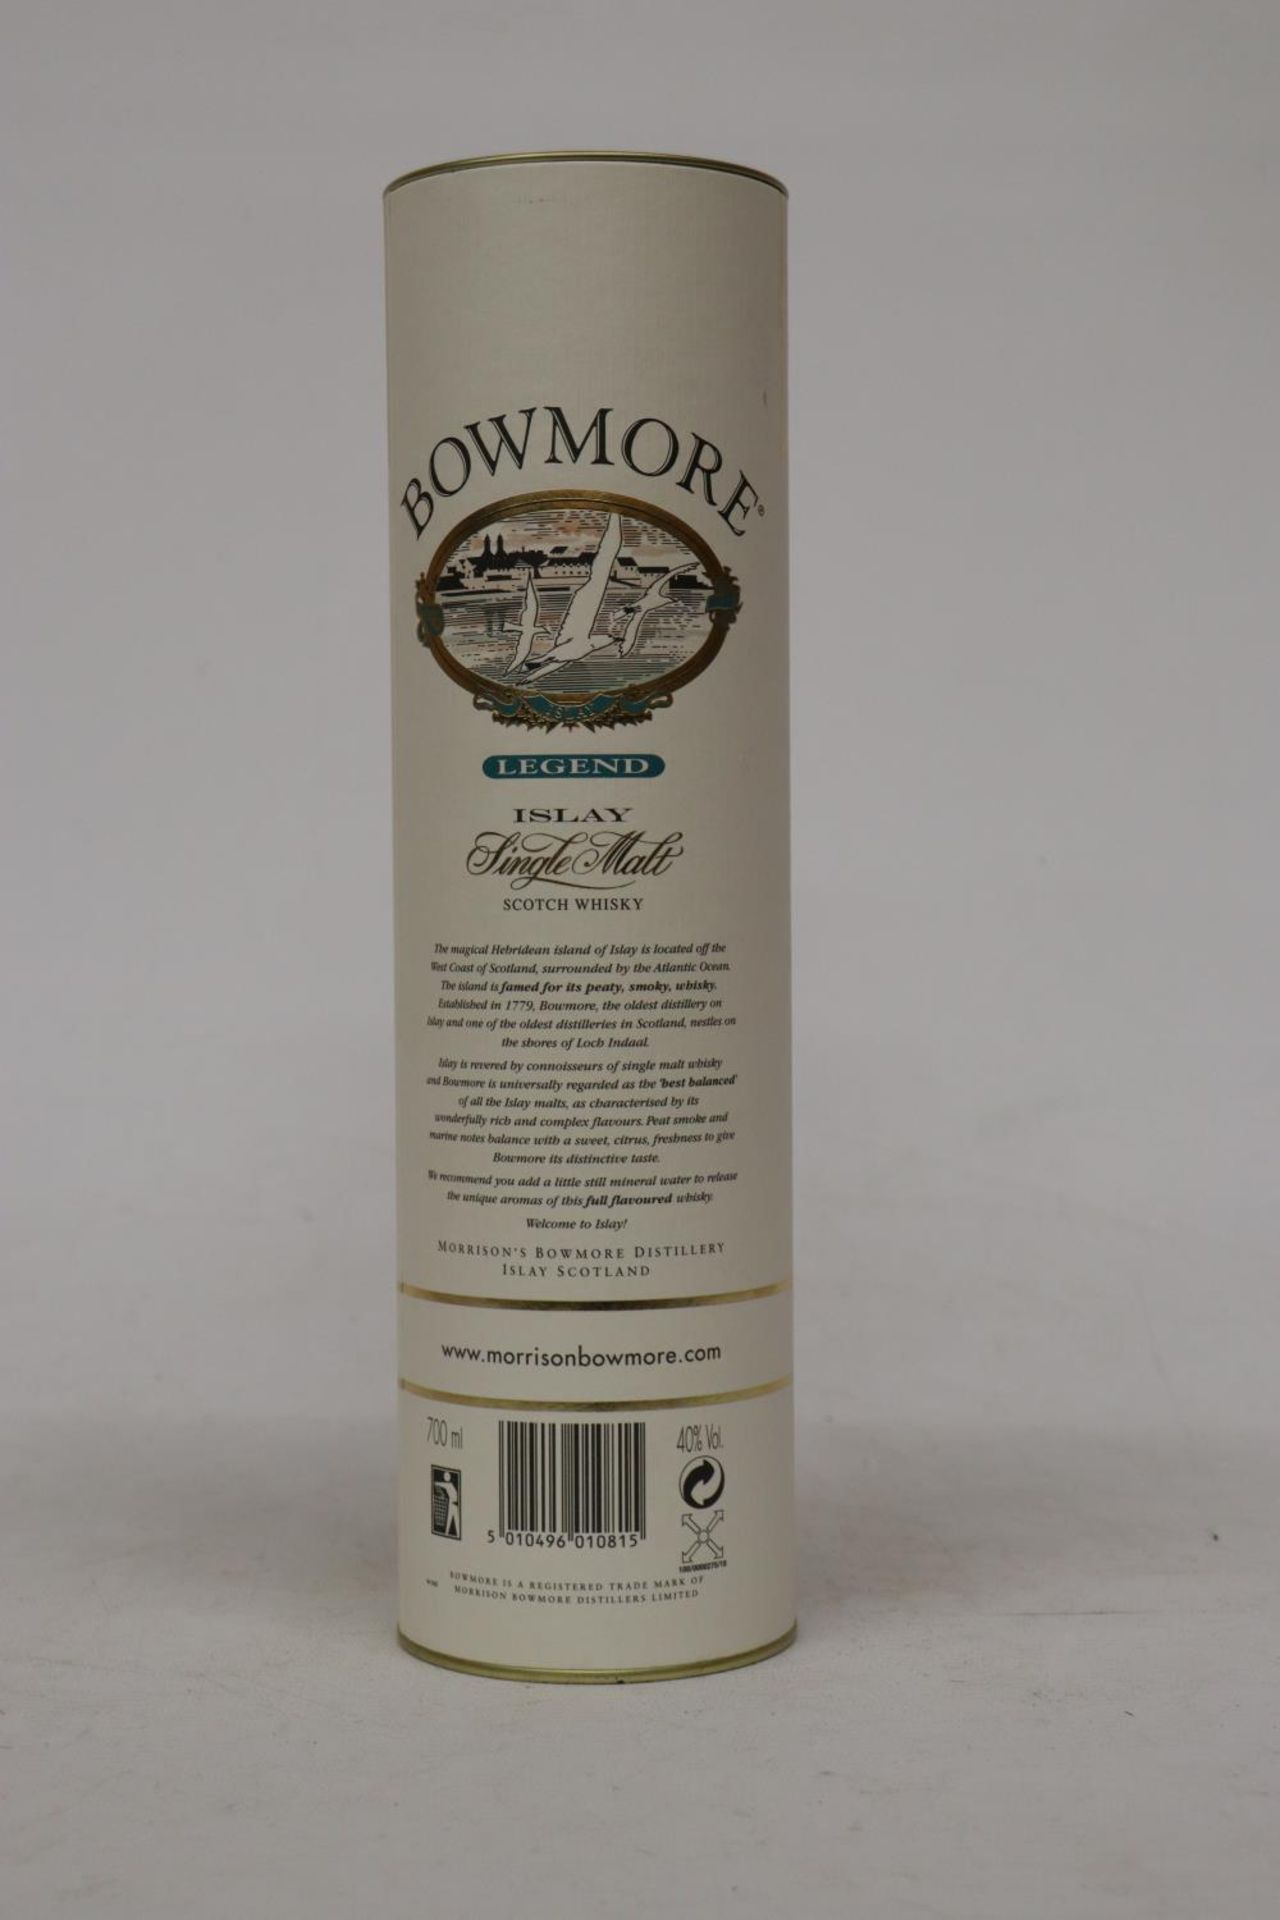 A BOTTLE OF BOWMORE LEGEND ISLAY SINGLE MALT WHISKY, BOXED - Image 3 of 5